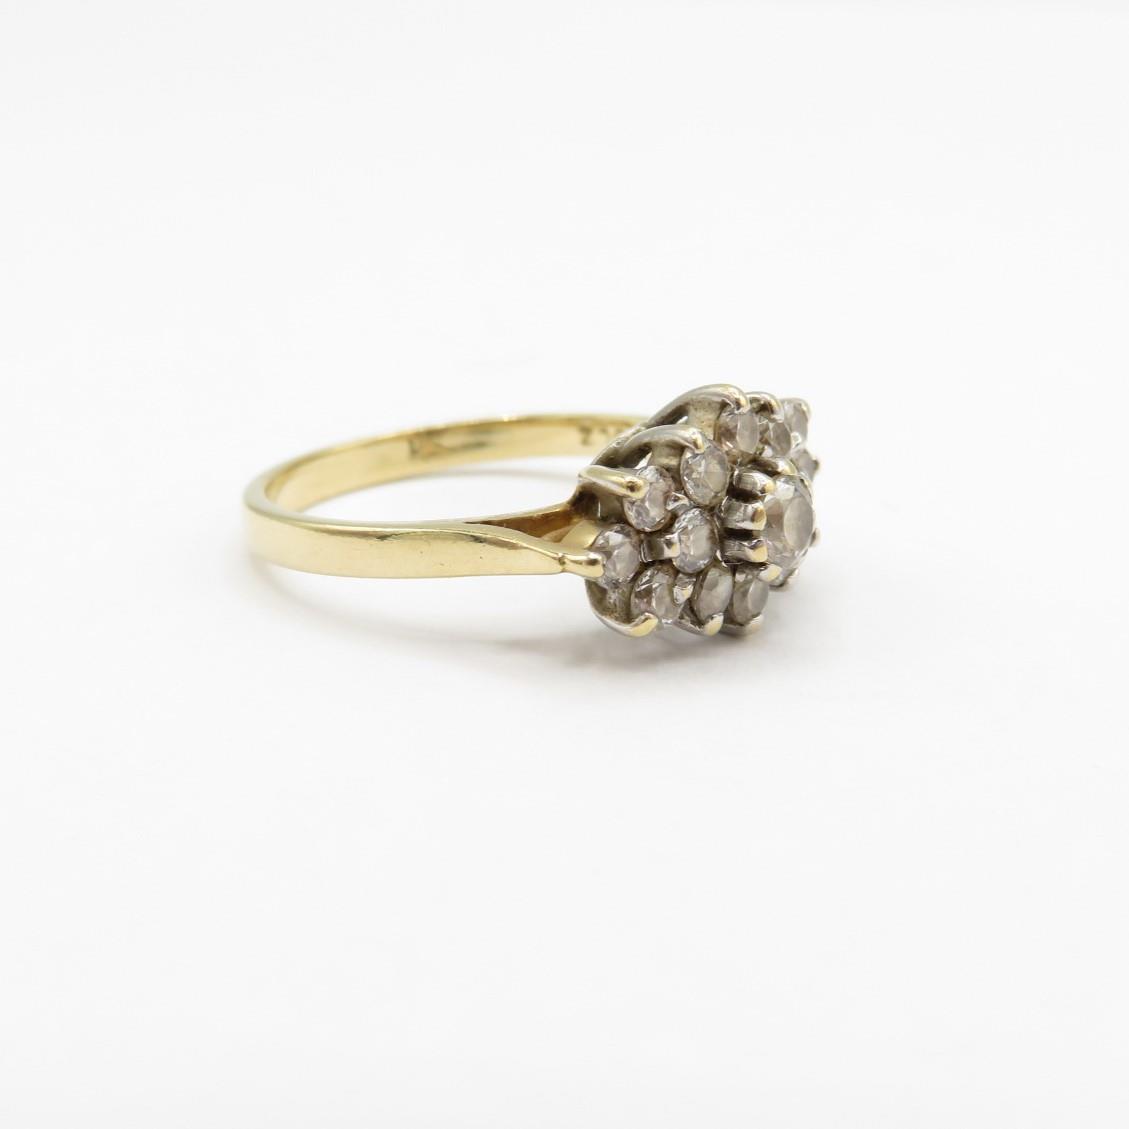 HM 9ct gold ring with white CZ stones (2.8g) Size L 1/2 - Image 3 of 5